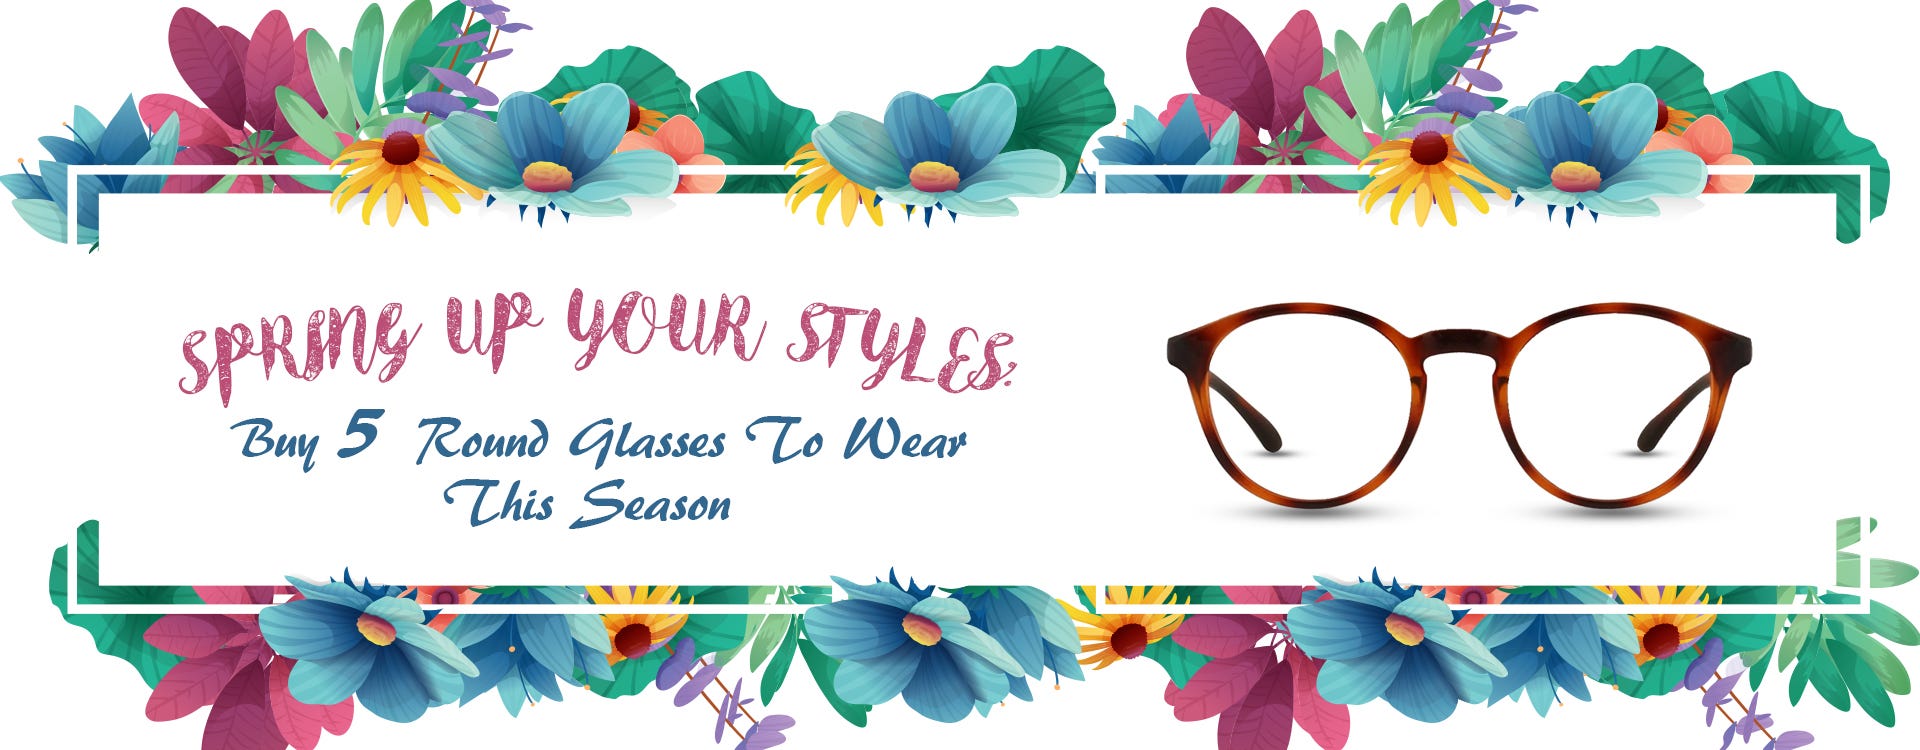 Spring Up Your Styles: Buy 5 Round Glasses To Wear This Season